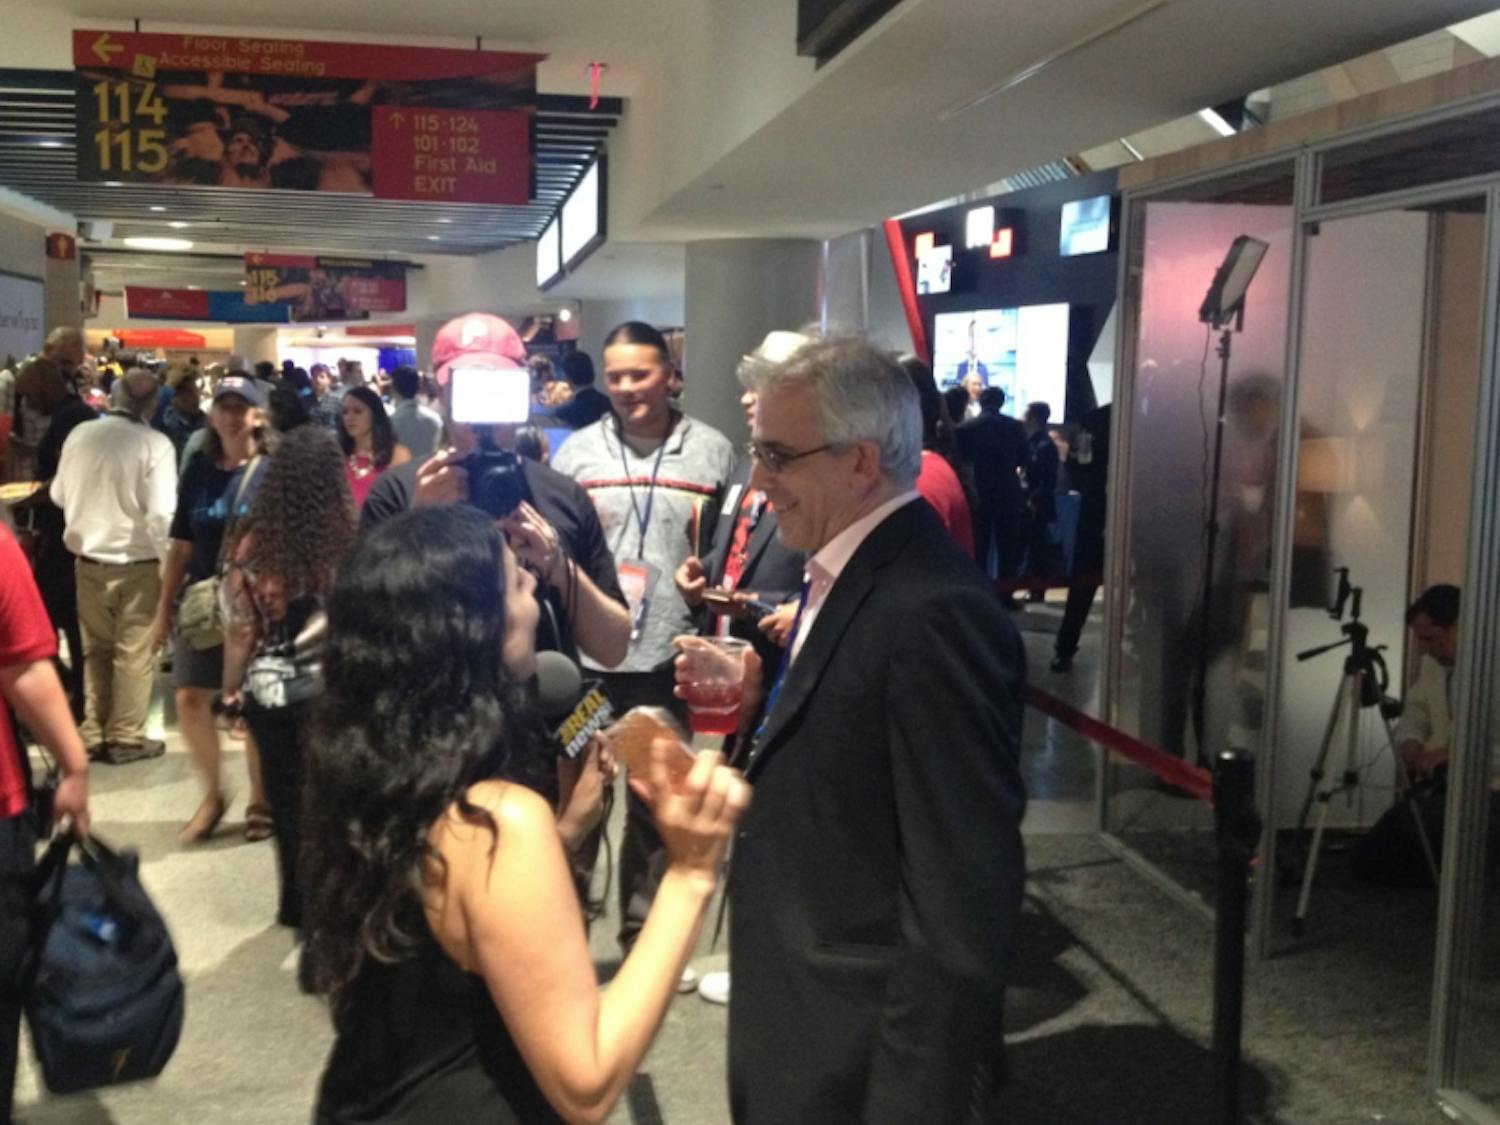 Mother Jones Washington Bureau Chief David Corn speaks with a reporter at the Democratic National Convention in Philadelphia on July 28, 2016. Corn broke the story of Mitt Romney's "47 percent" comments, caught on a secret videotape, during the 2012 presidential election.